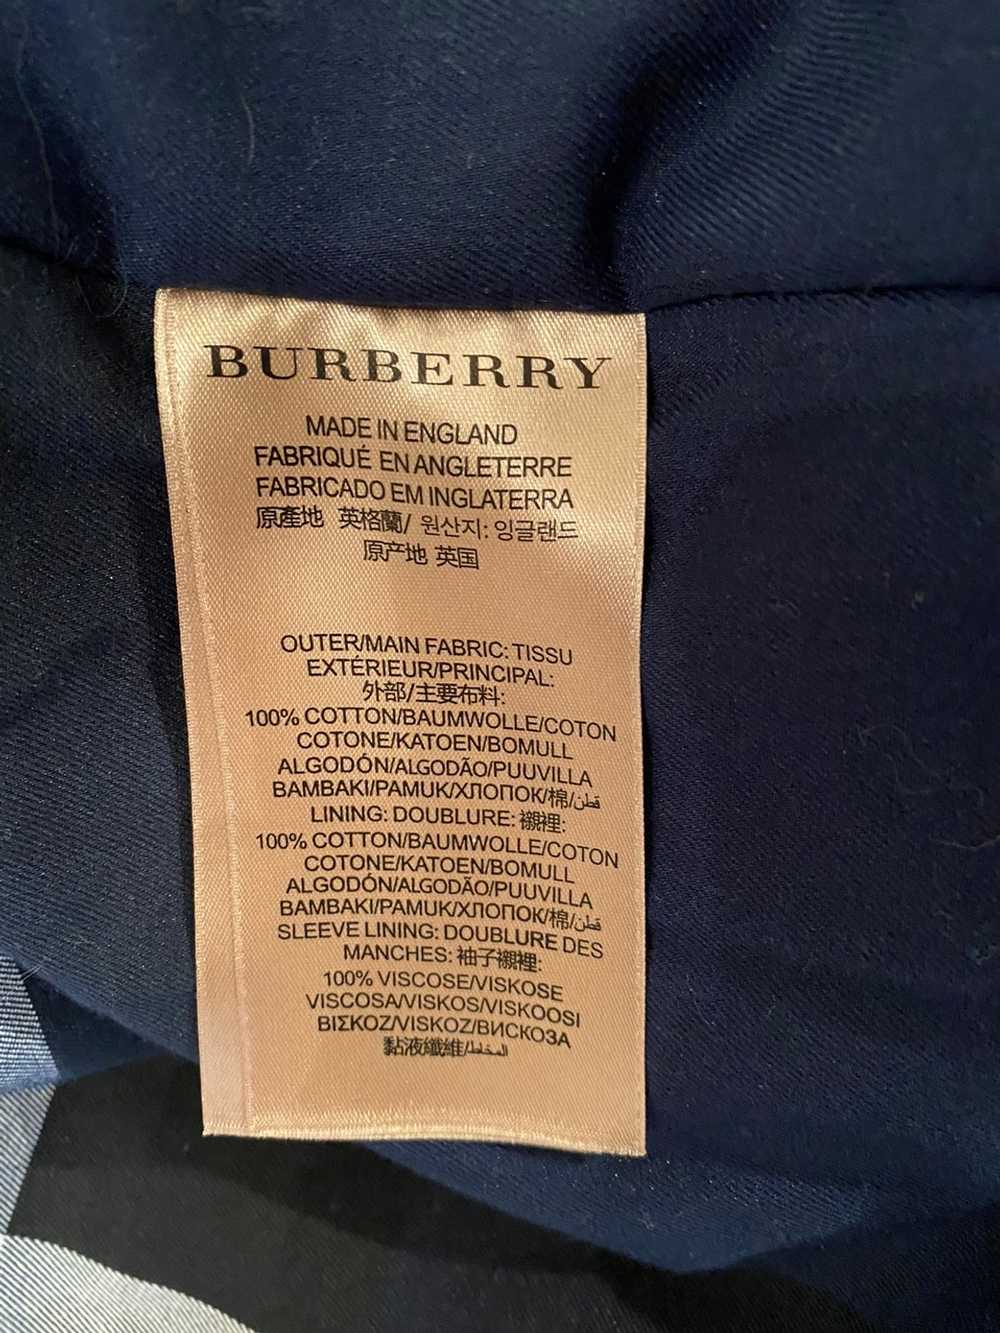 Burberry Burberry Royal Blue Quilted Bomber Jacket - image 4